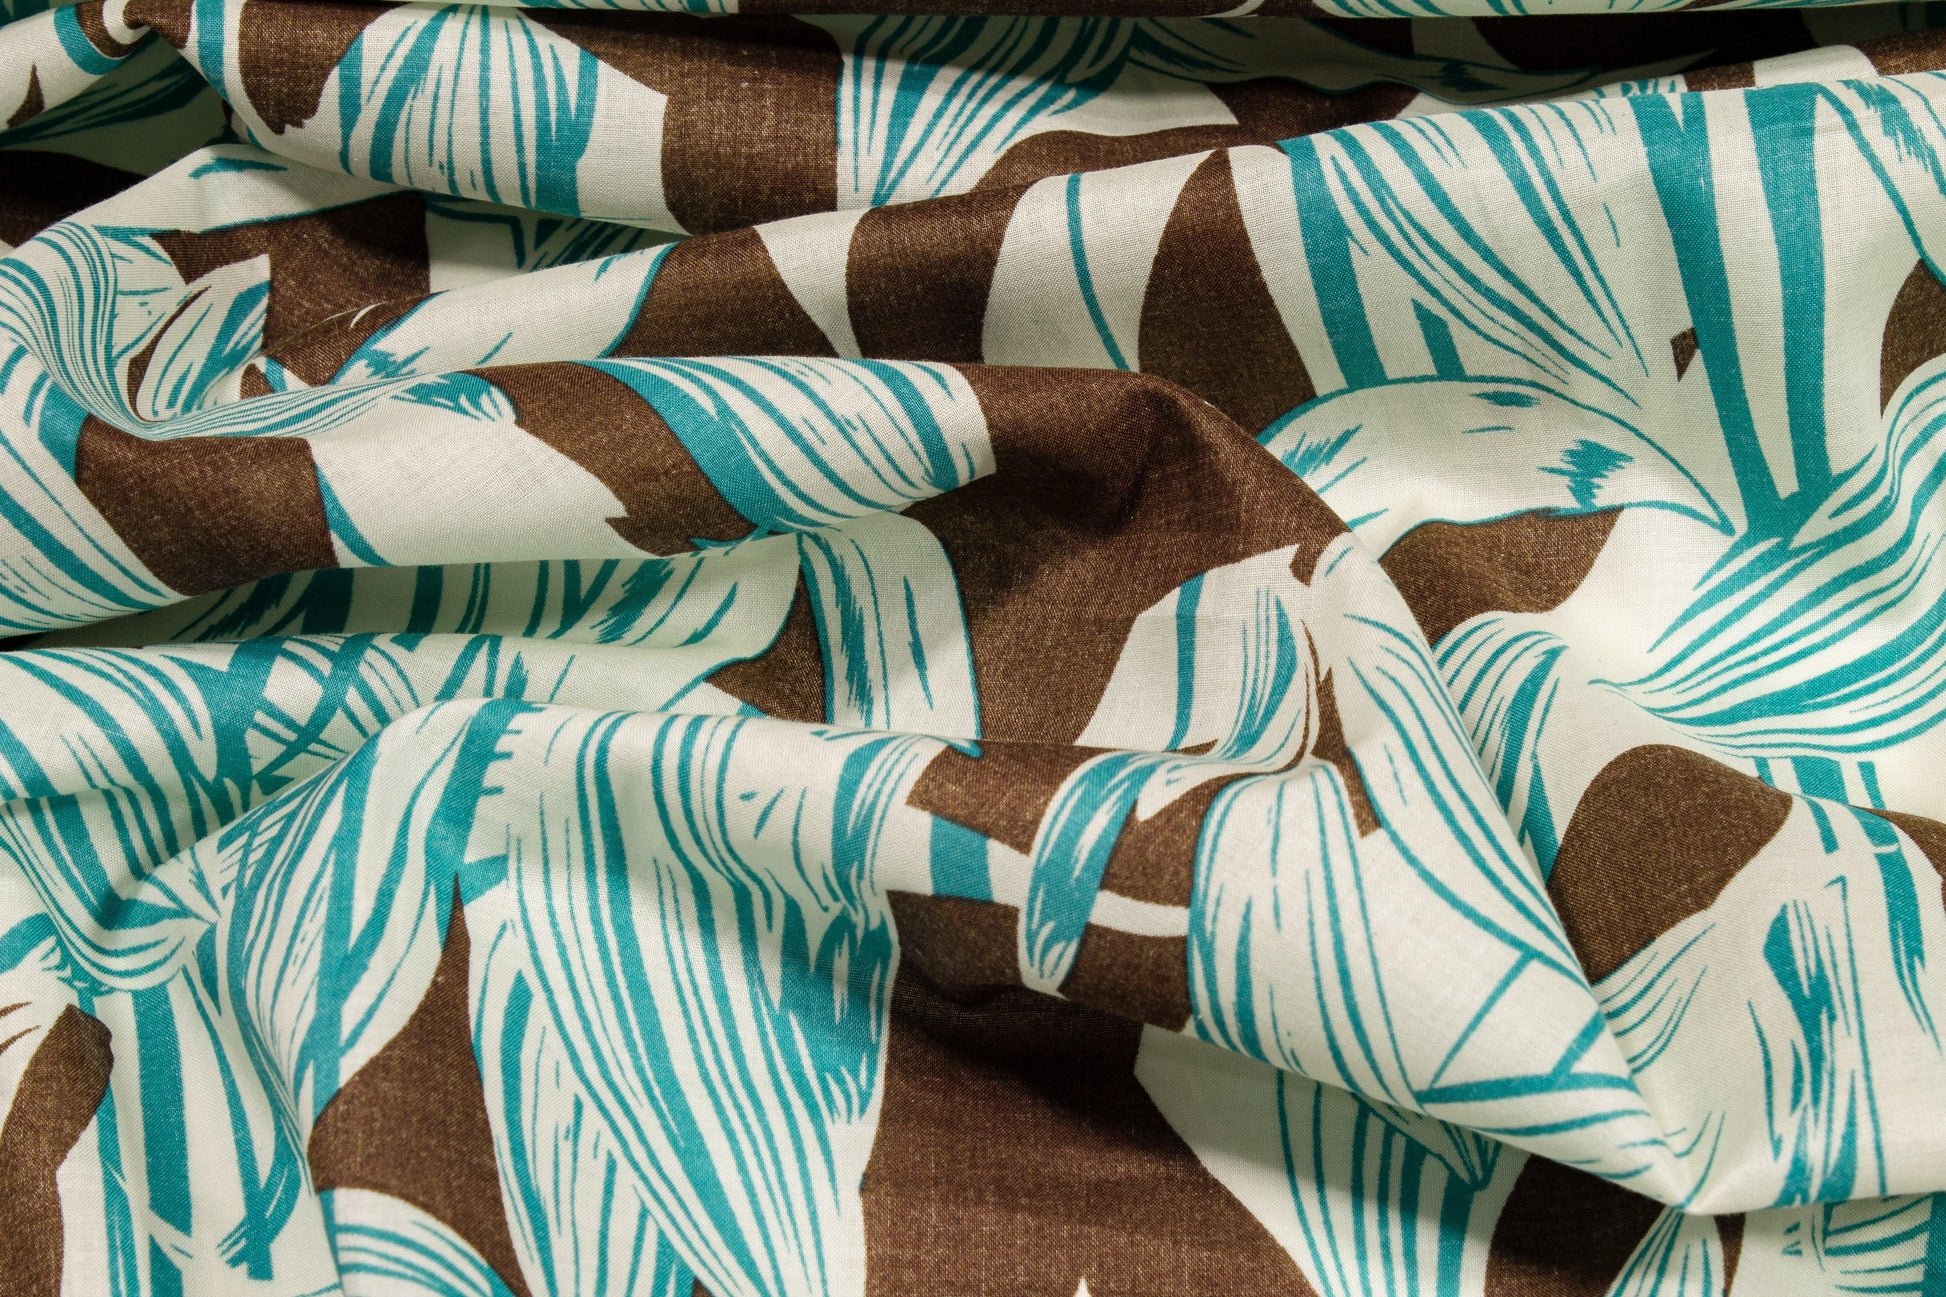 Leaf Print Cotton Voile - Brown, Turquoise, Off White - Prime Fabrics